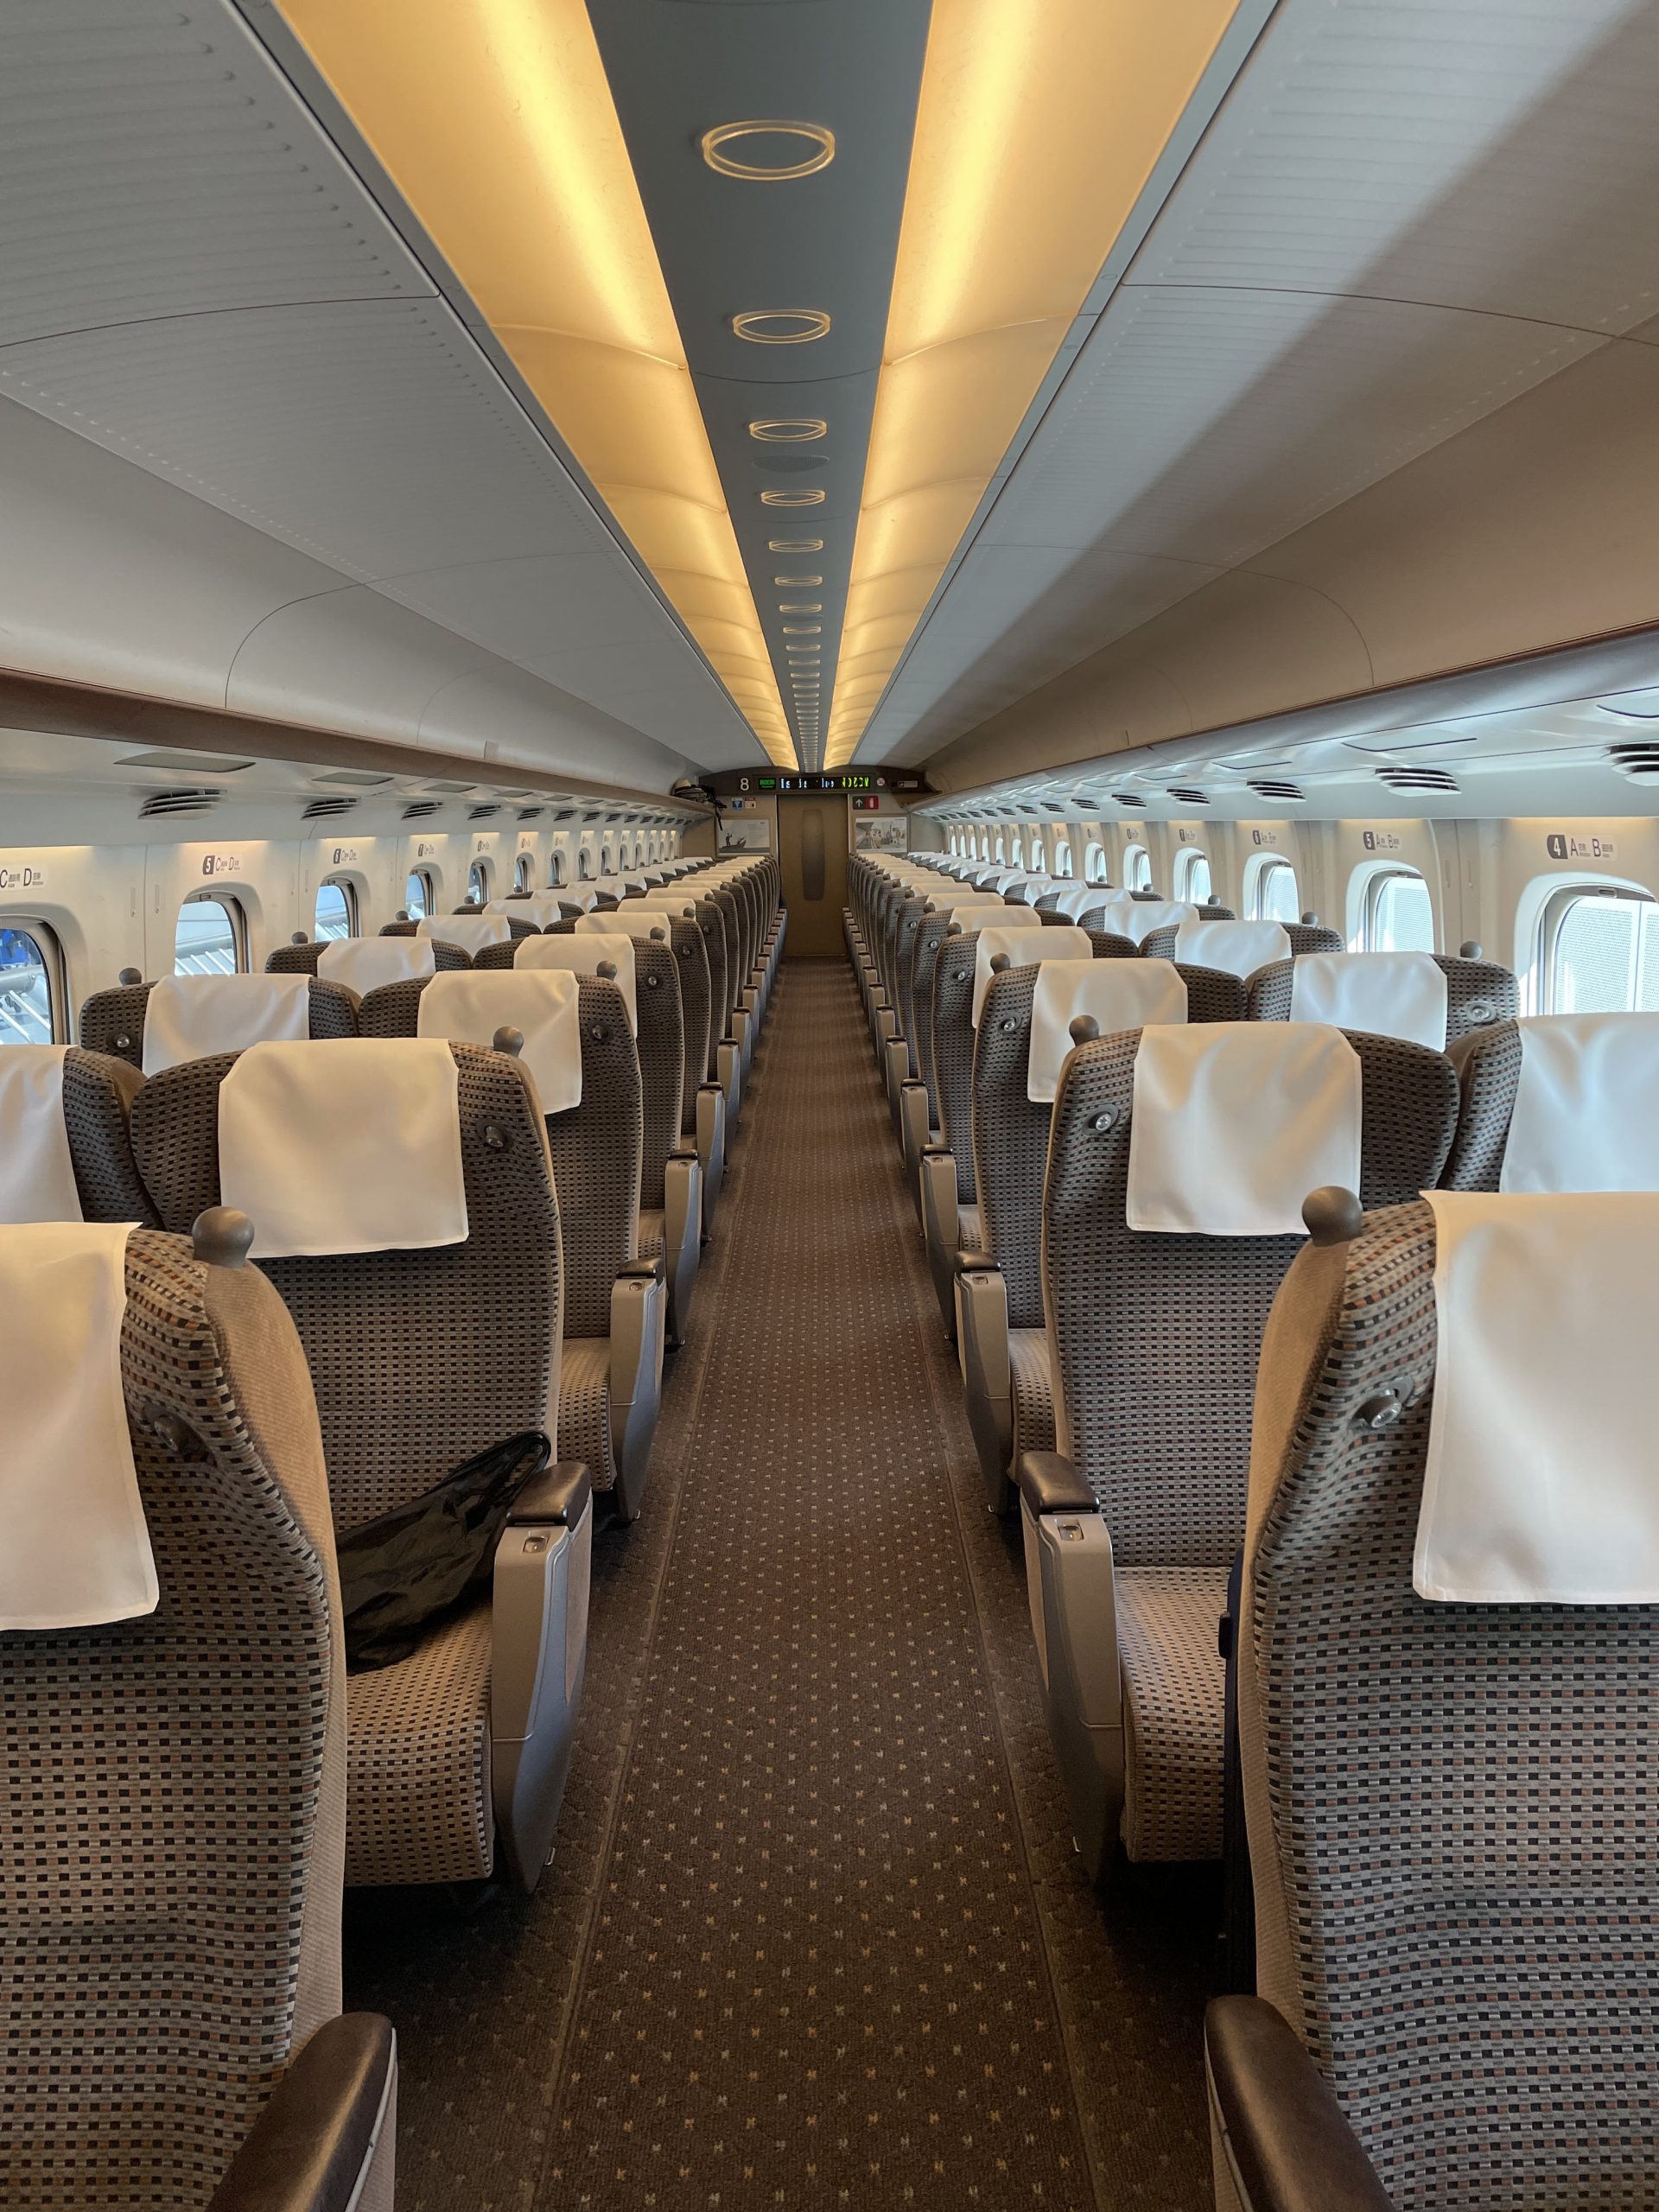 shinkansen bullet train tokyo kyoto first class green class review is it worth upgrading what to do if have oversized luggage how to take the bullet train tutorial